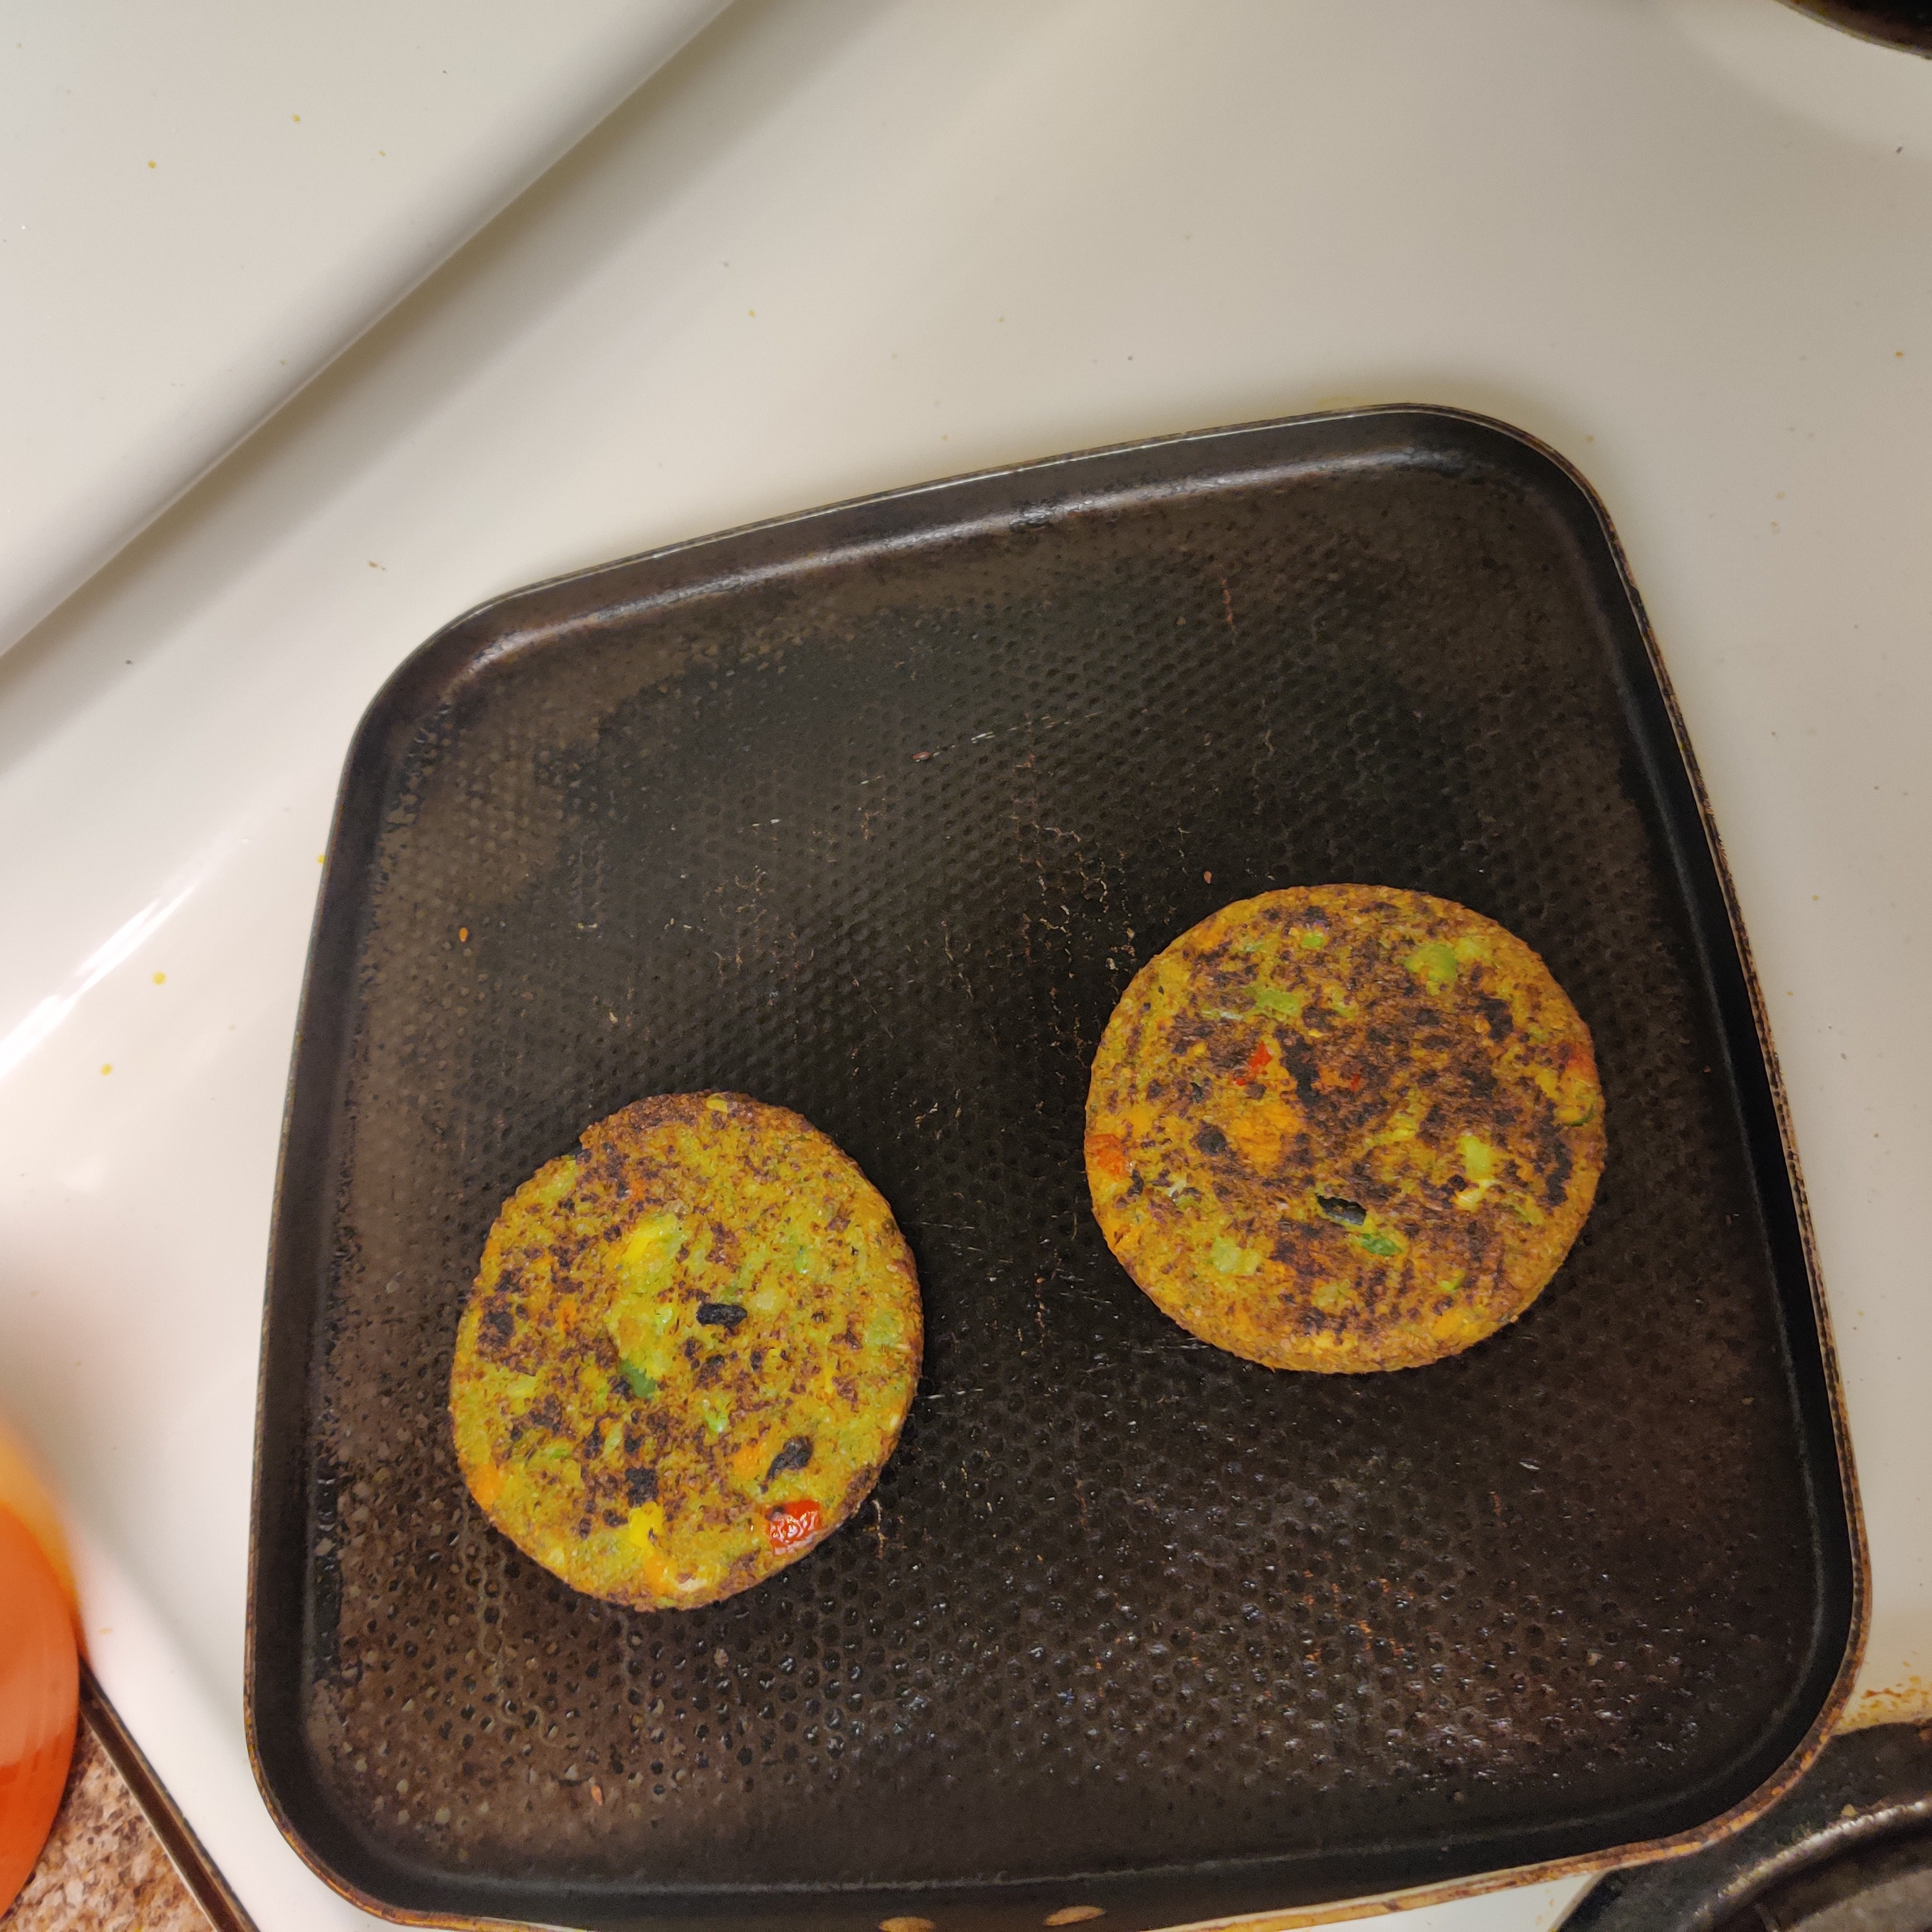 Image of burgers after heating